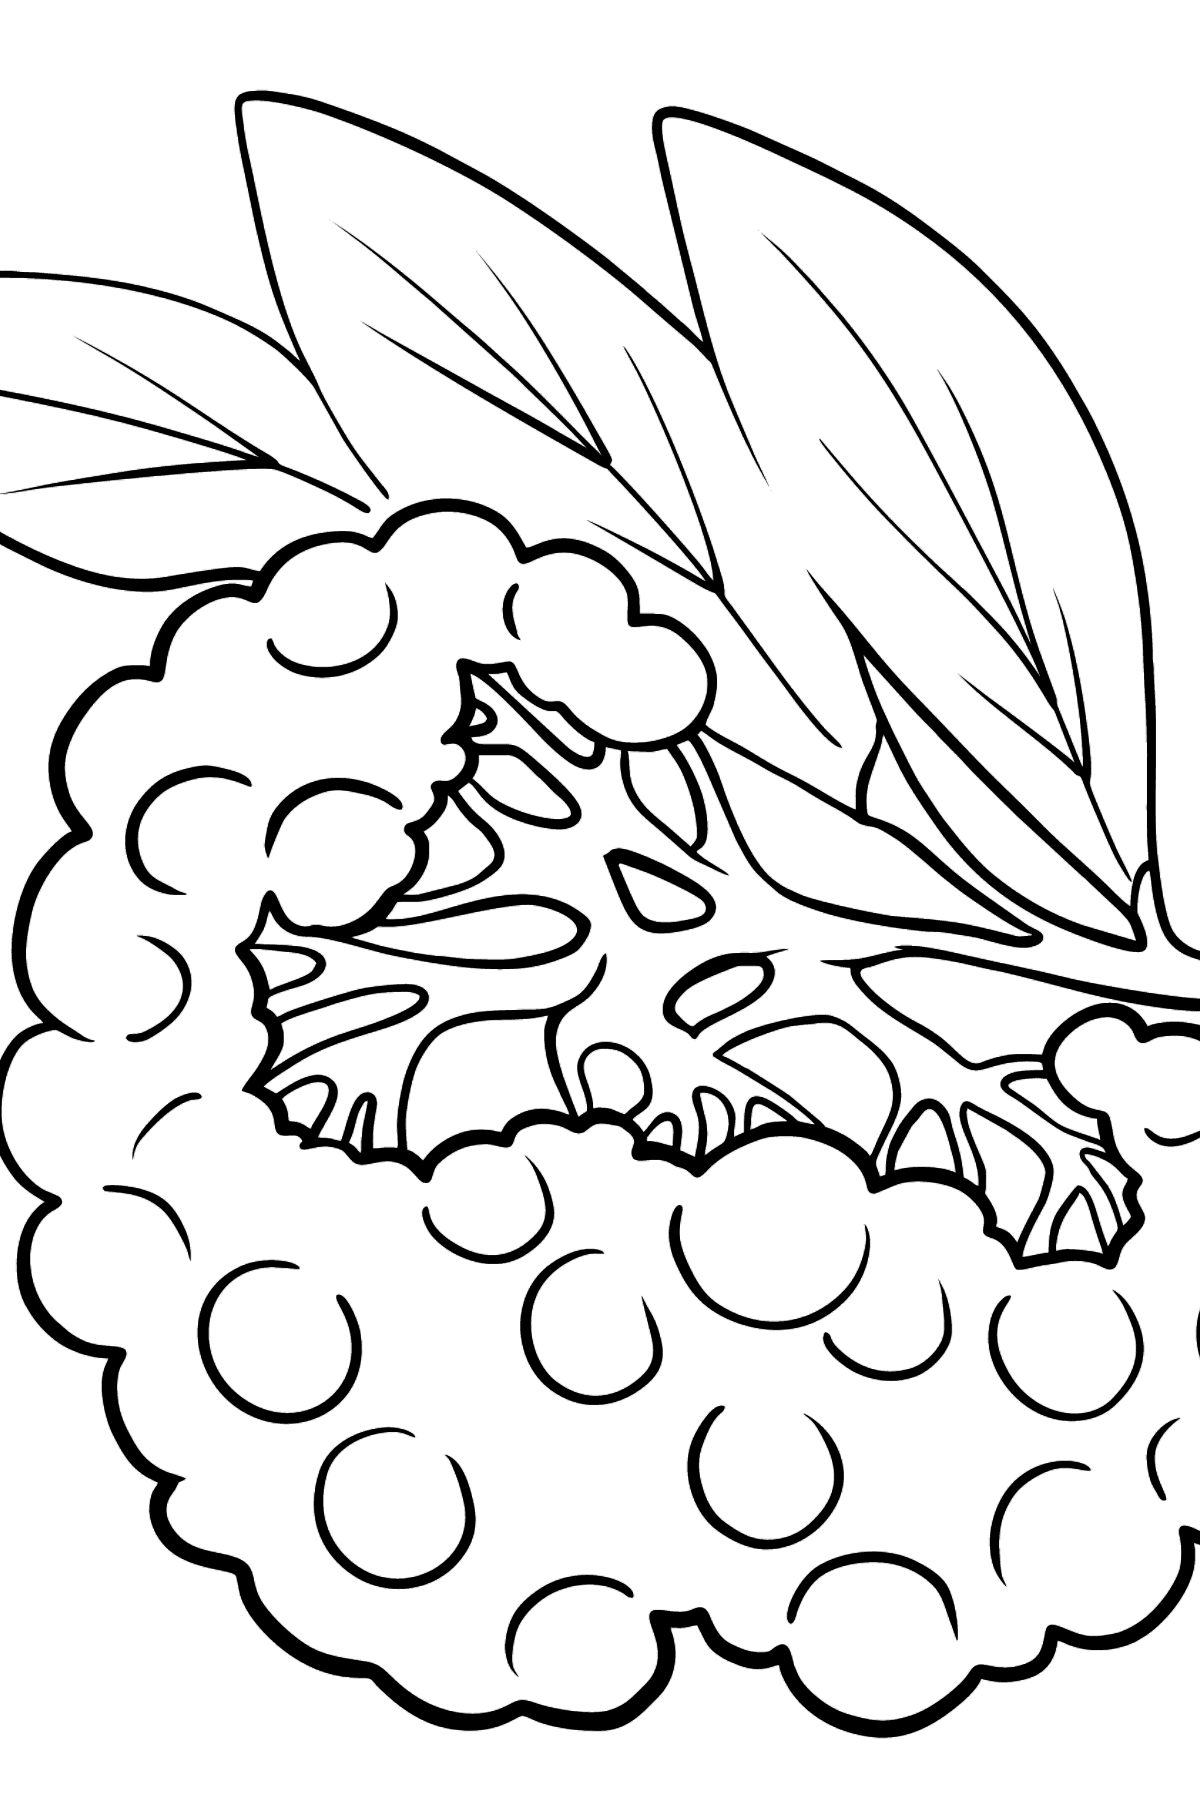 Elderberry coloring page - Coloring Pages for Kids